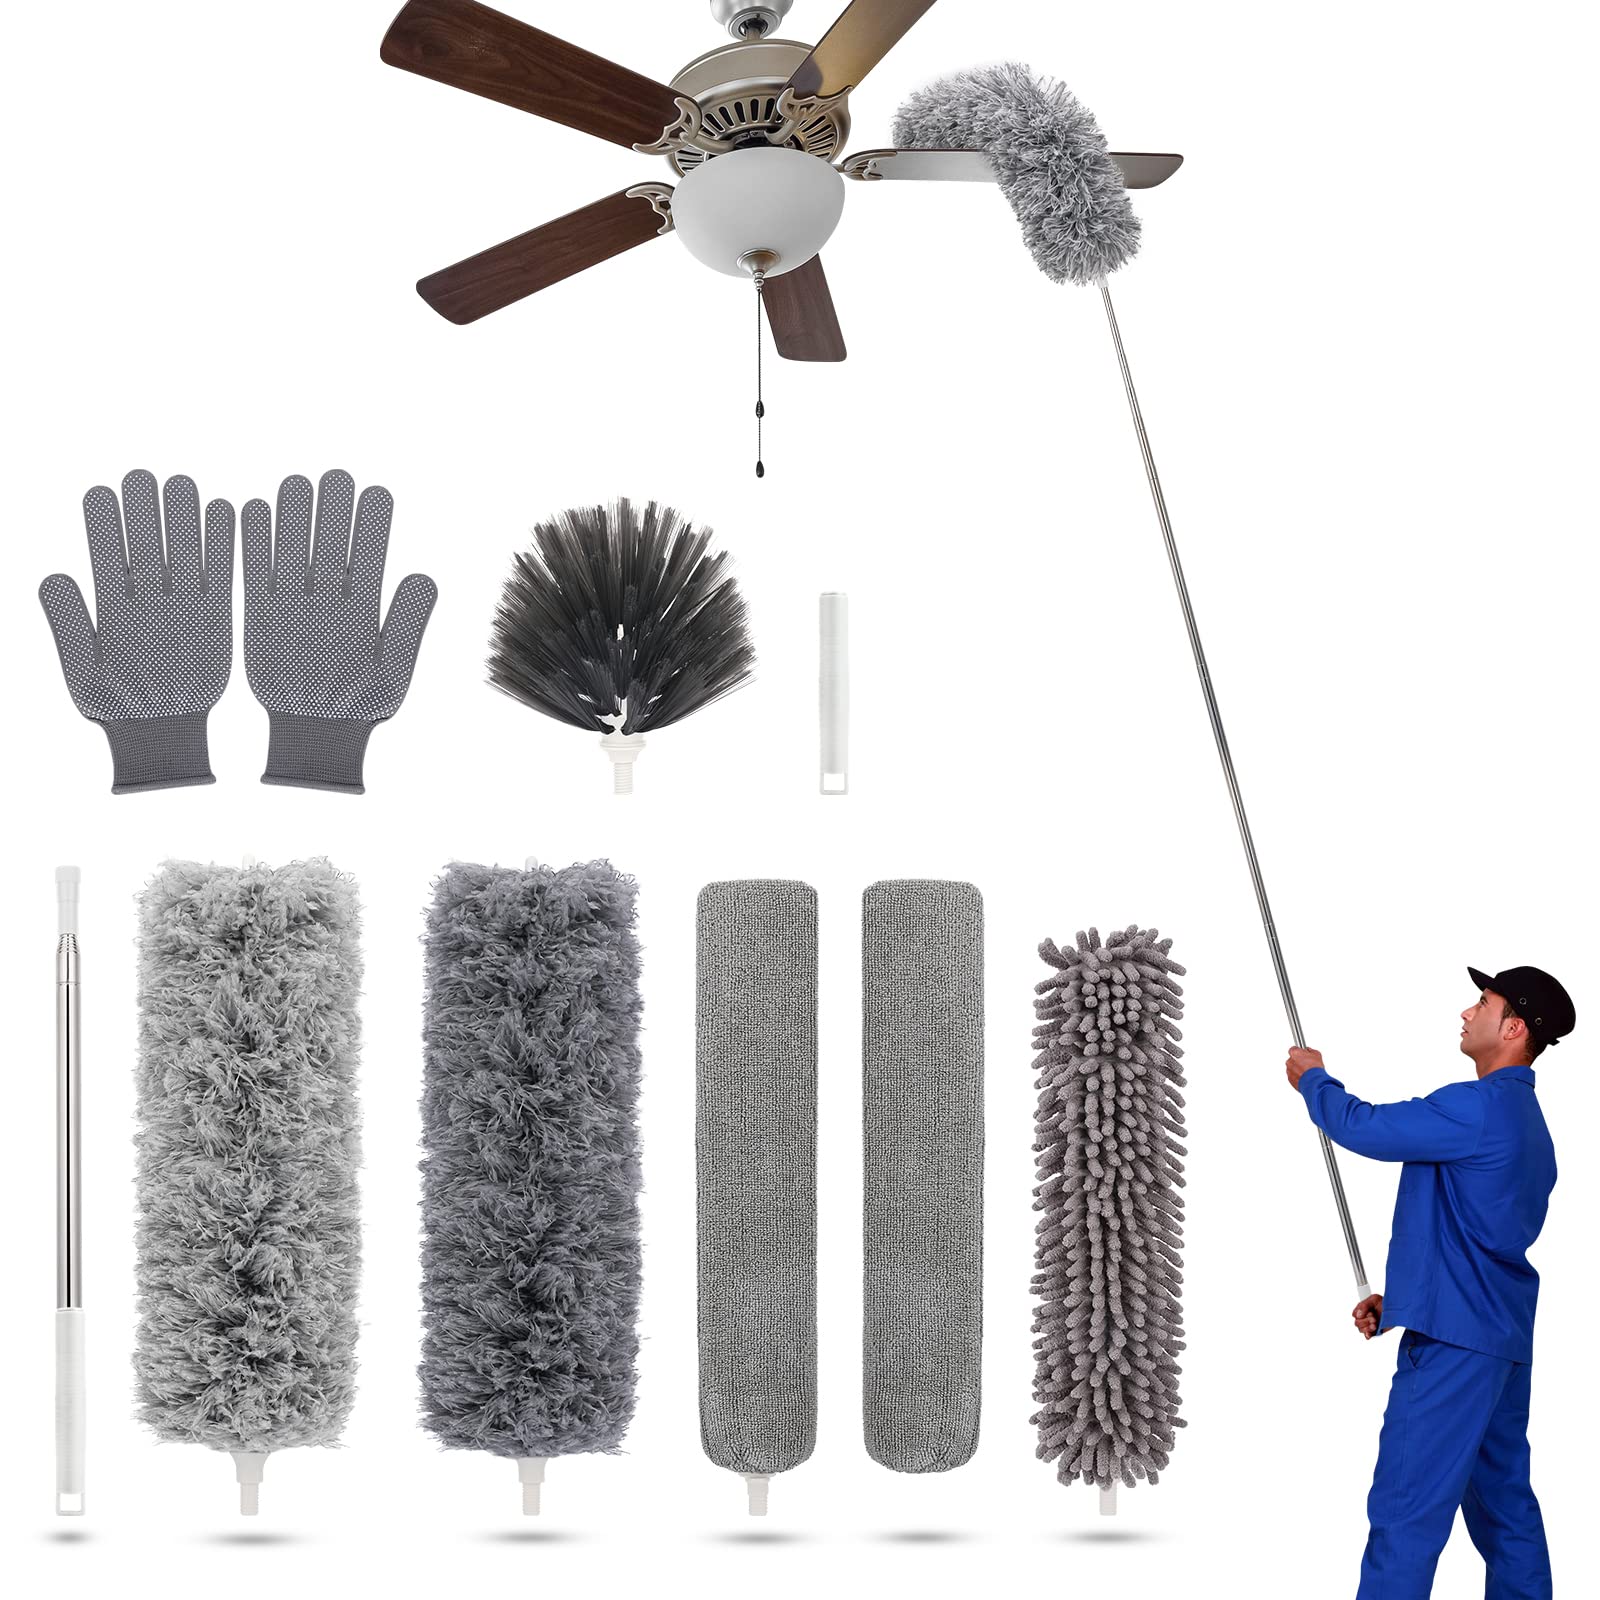 KYEHg Duster With Extension Pole For Cleaning Ceiling Fans, High Ceilings, In Addition, Dusters For Cleaning Can Also Be Used For Low